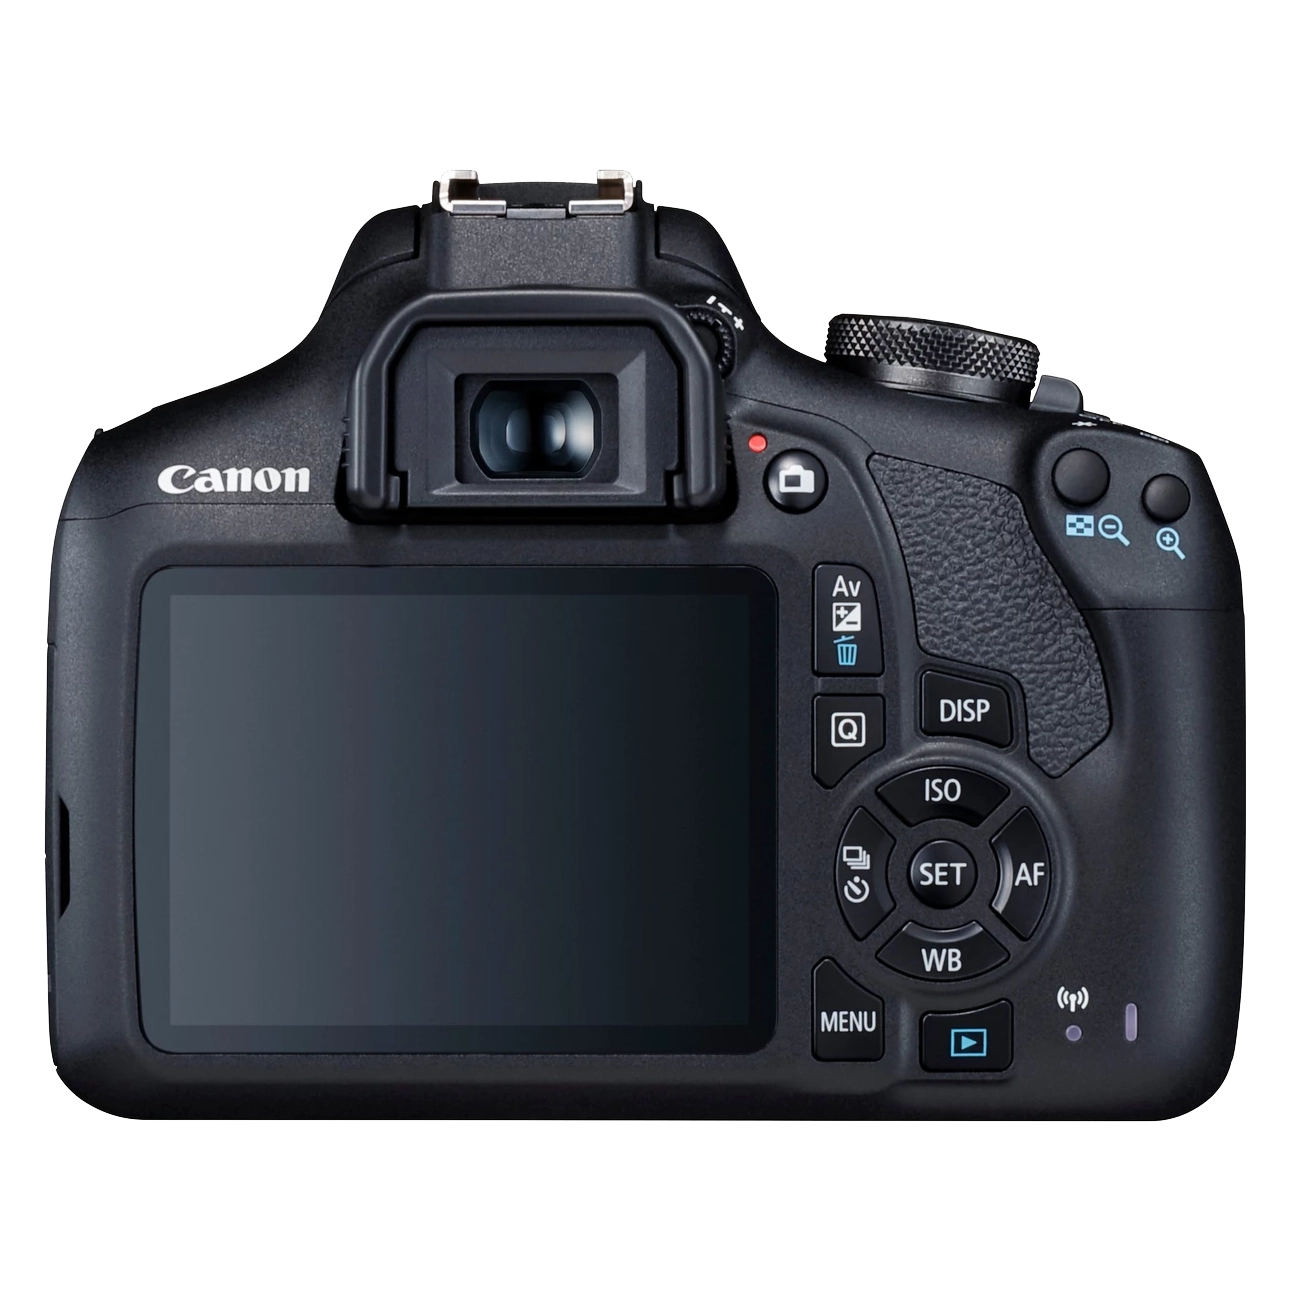 Canon EOS 2000D with 18-55 Lens